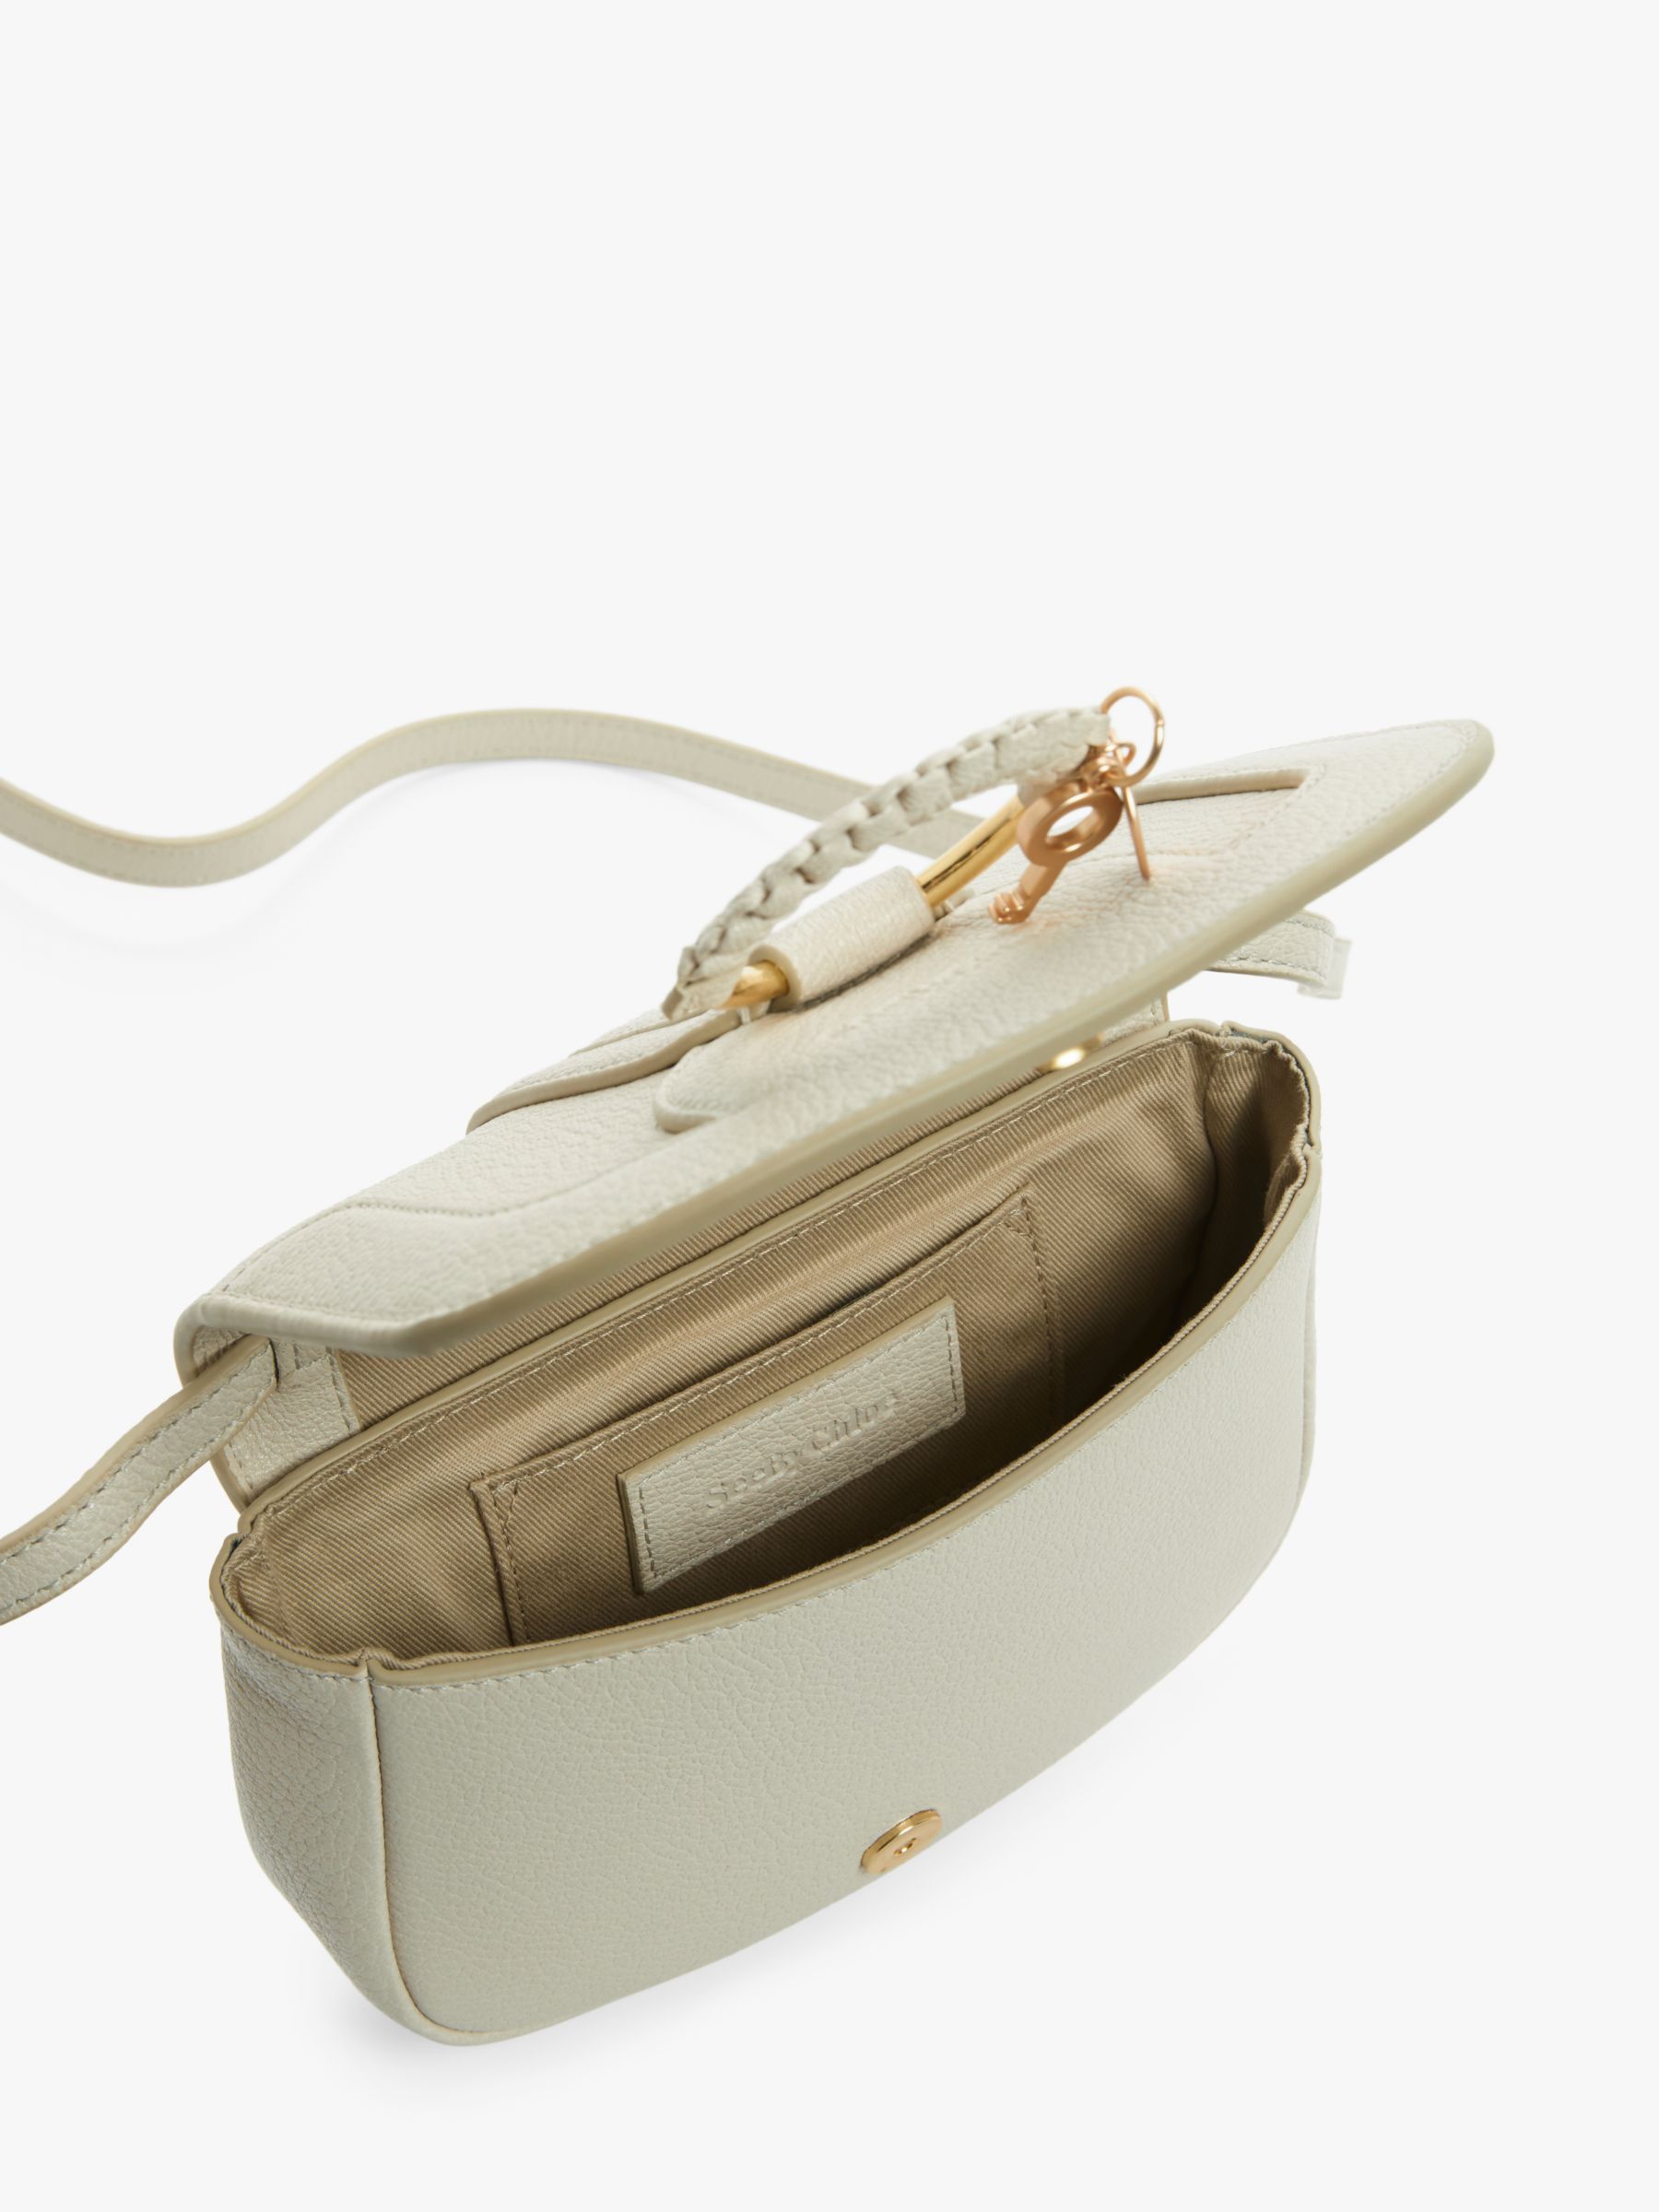 Buy See By Chloé Mini Hana Leather Satchel Bag Online at johnlewis.com